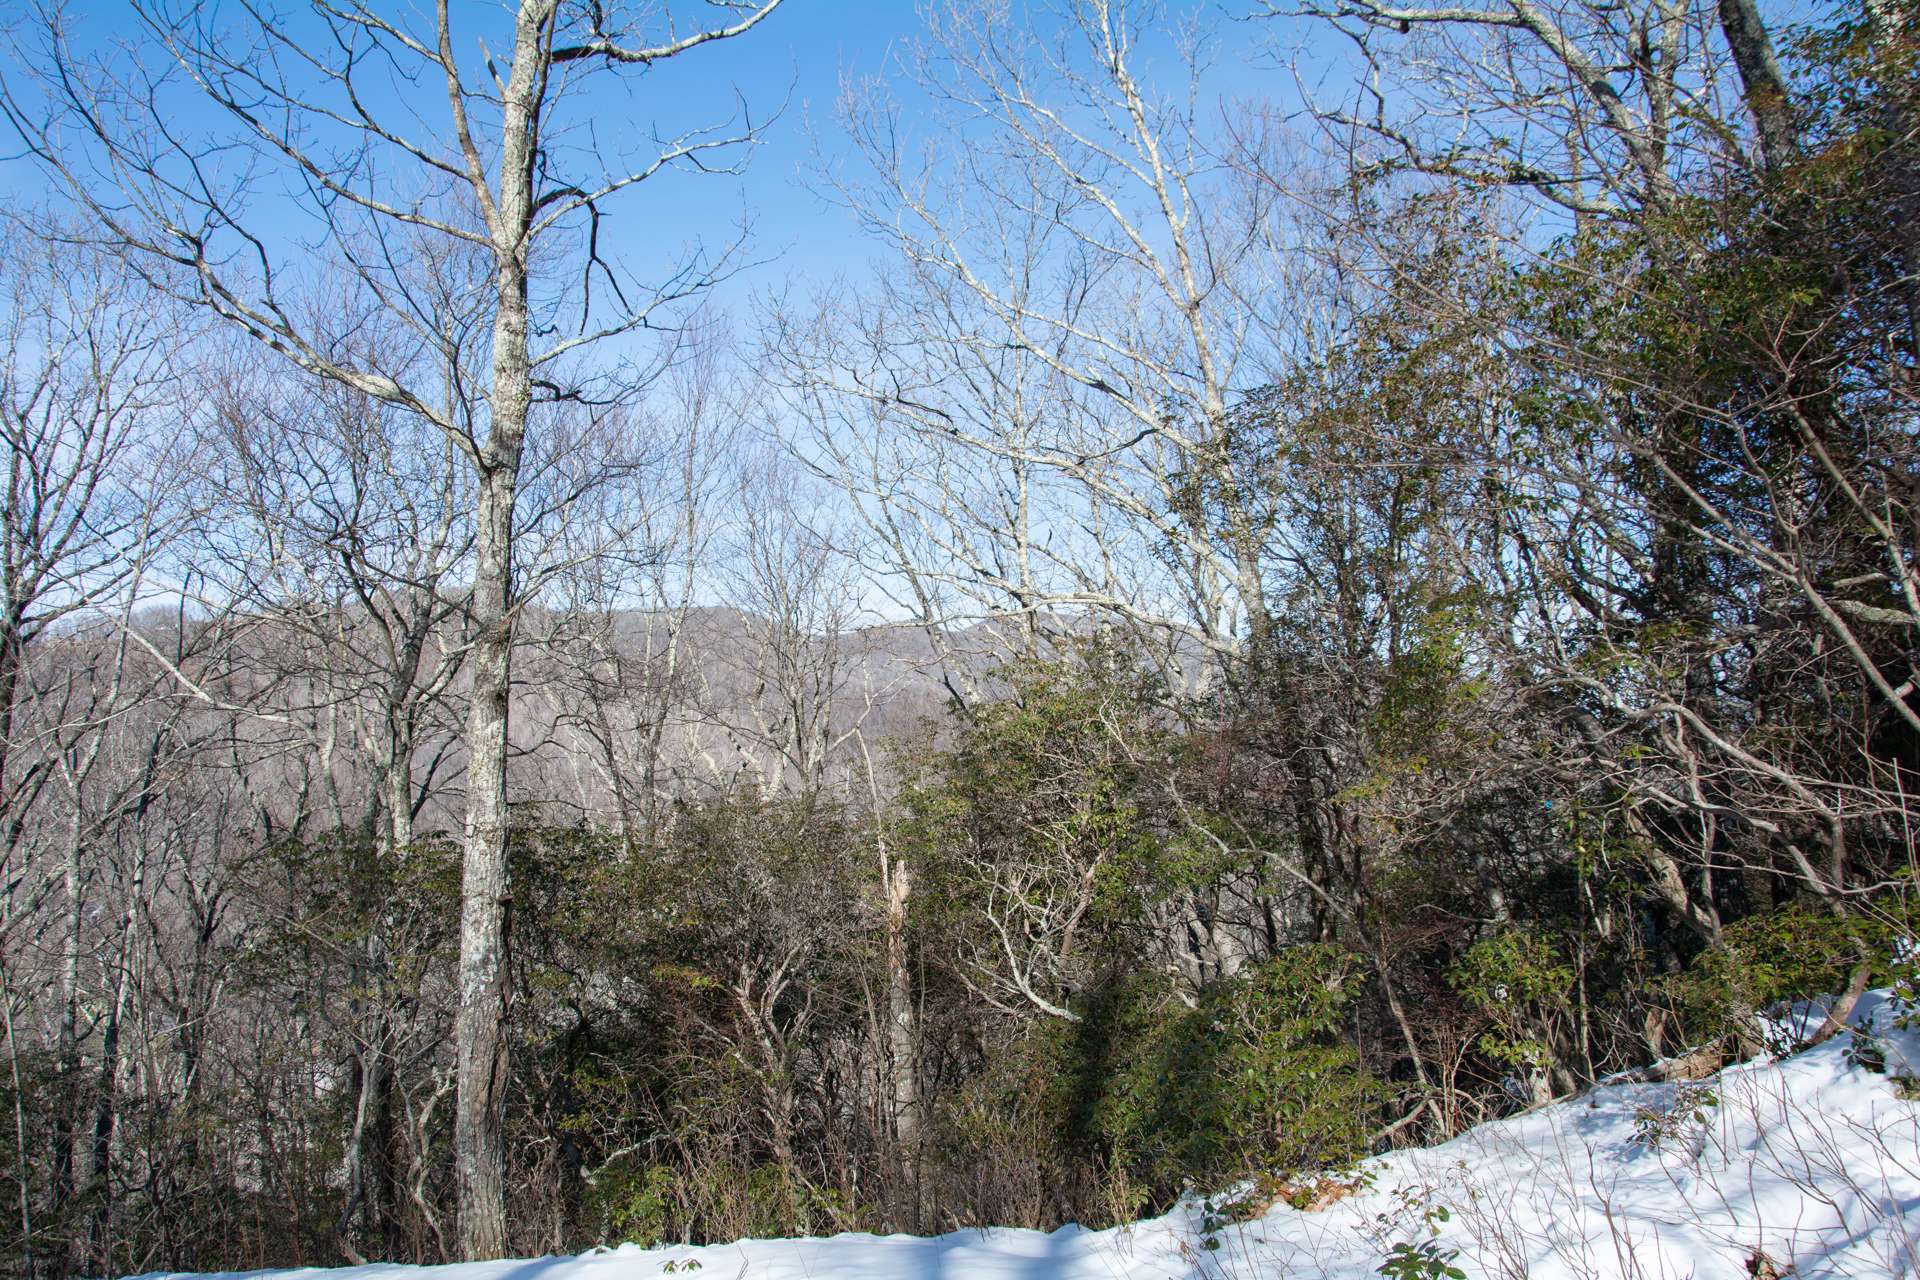 This beautifully wooded mountain home site is the ideal choice for your NC Mountain retreat cabin or primary home.